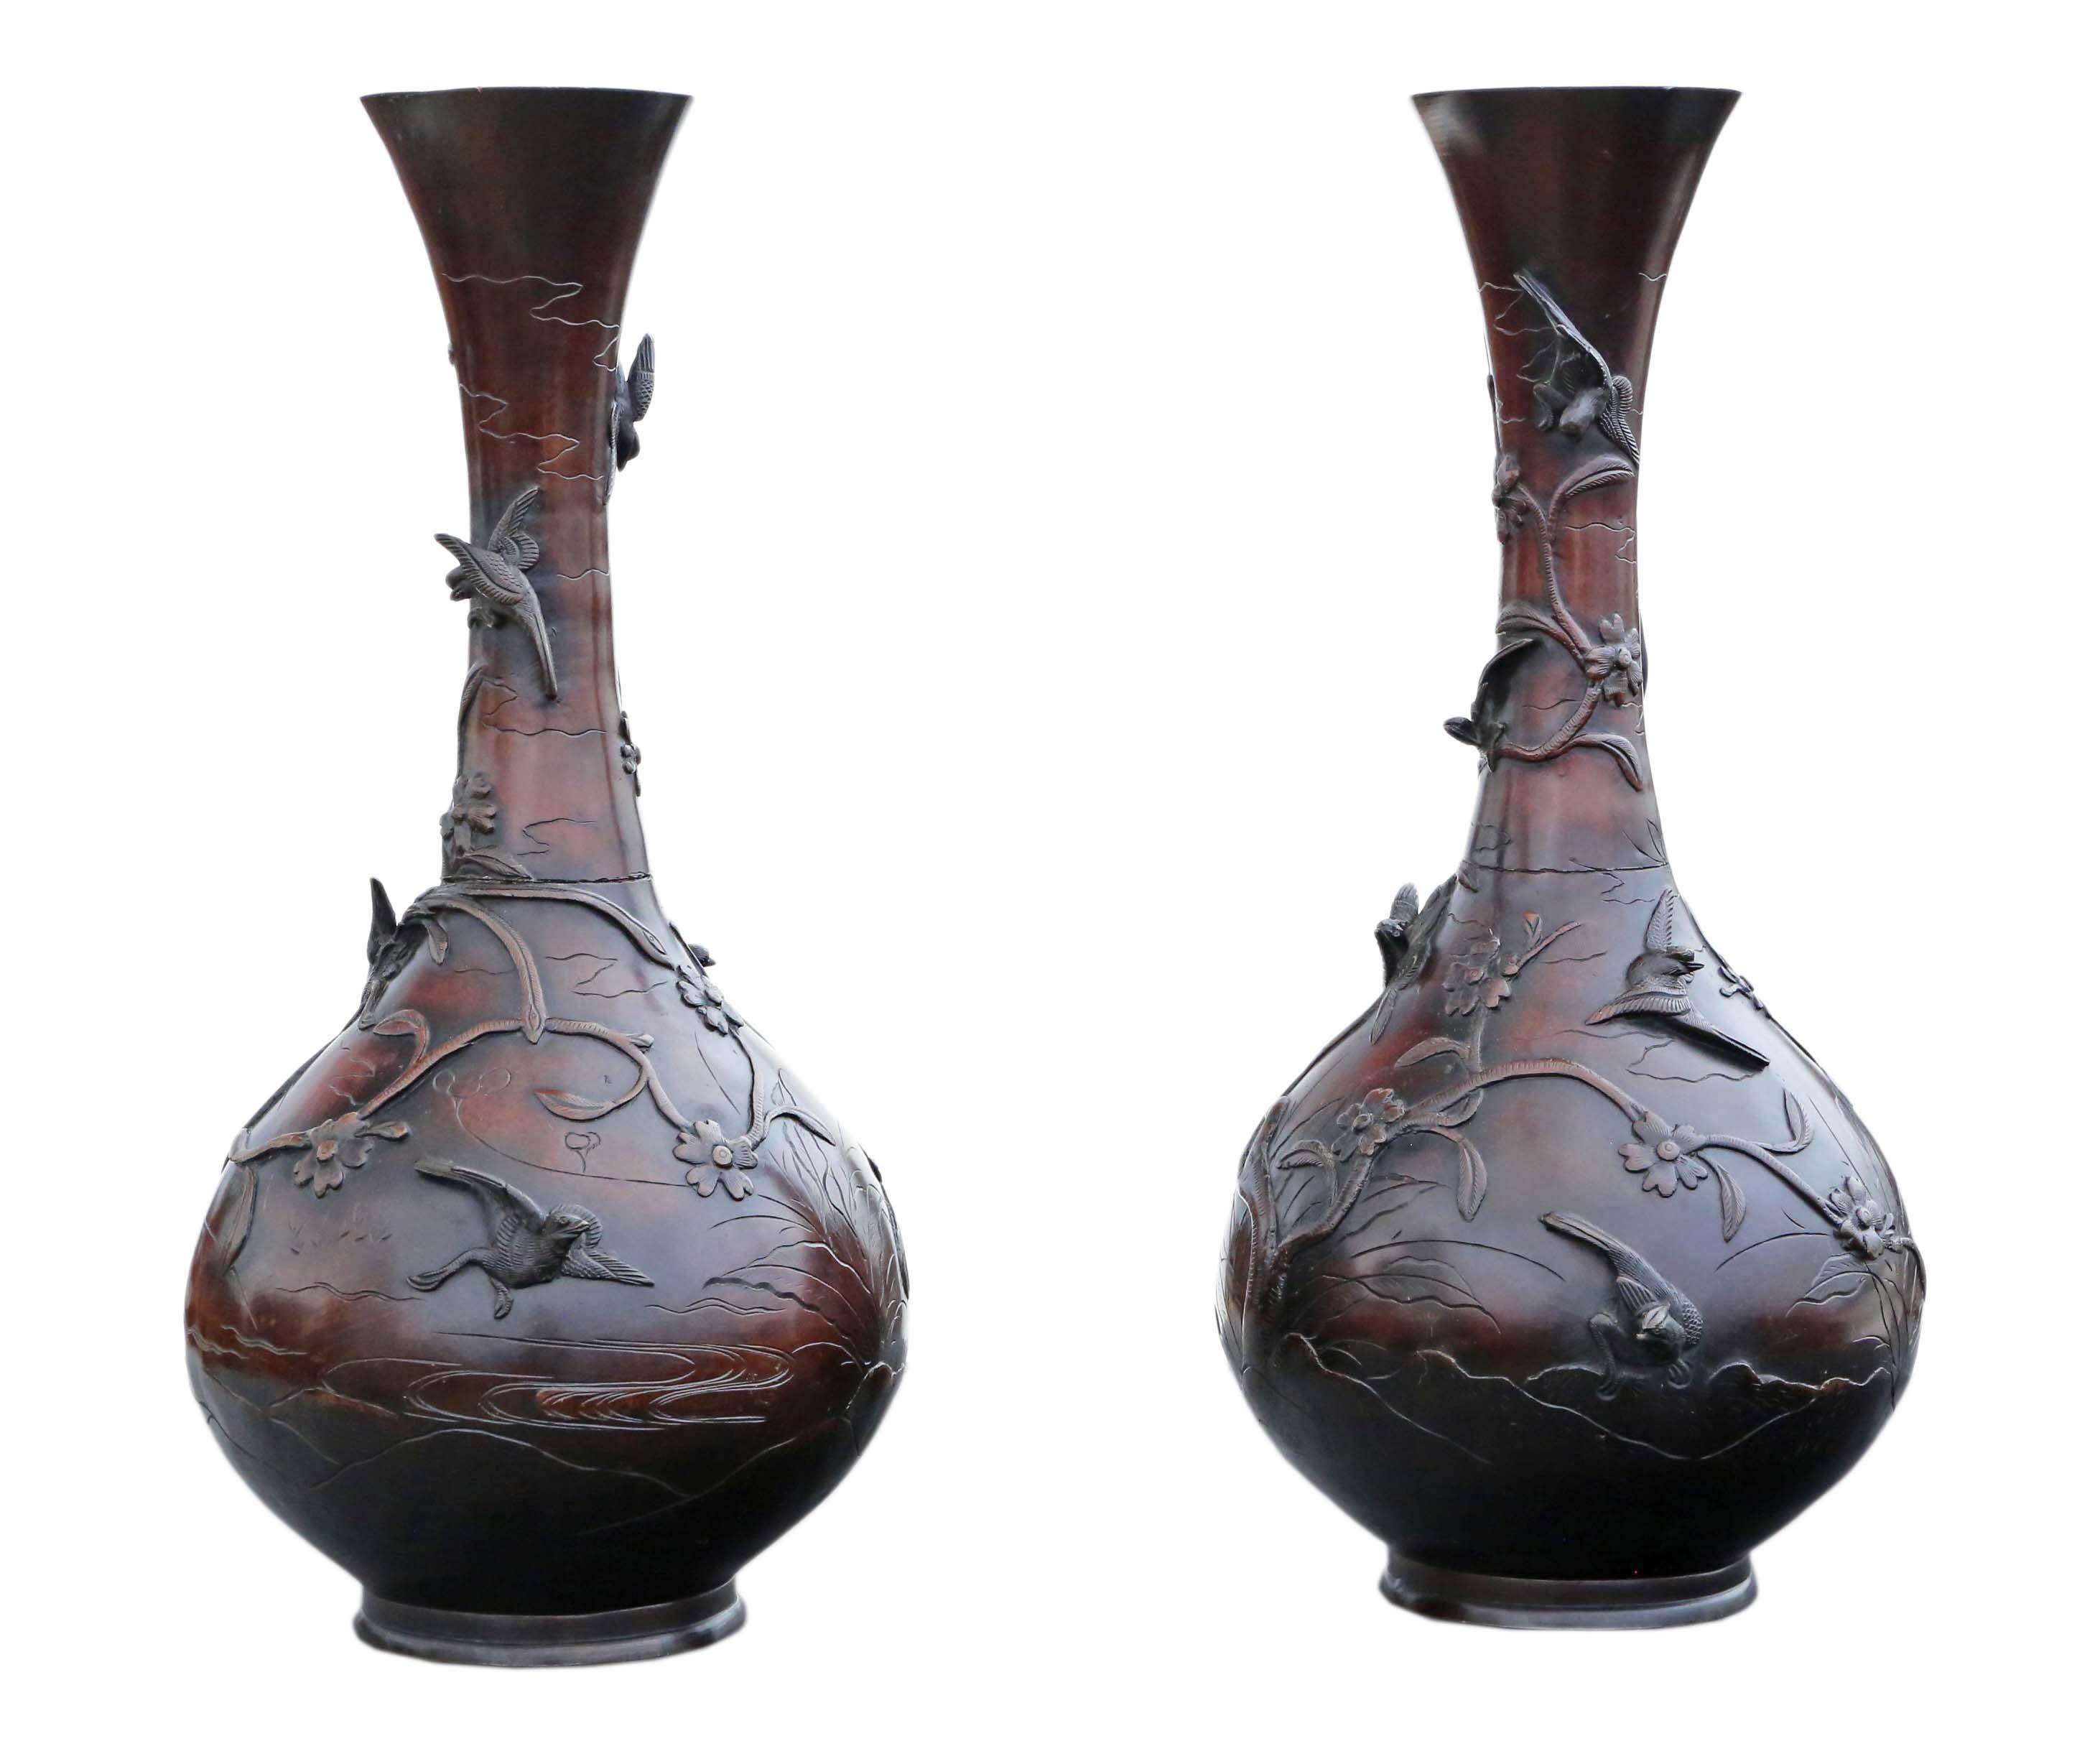 Very Large Pair of Fine Quality Japanese Bronze Vases - Antique, 19th Century Me In Good Condition For Sale In Wisbech, Cambridgeshire